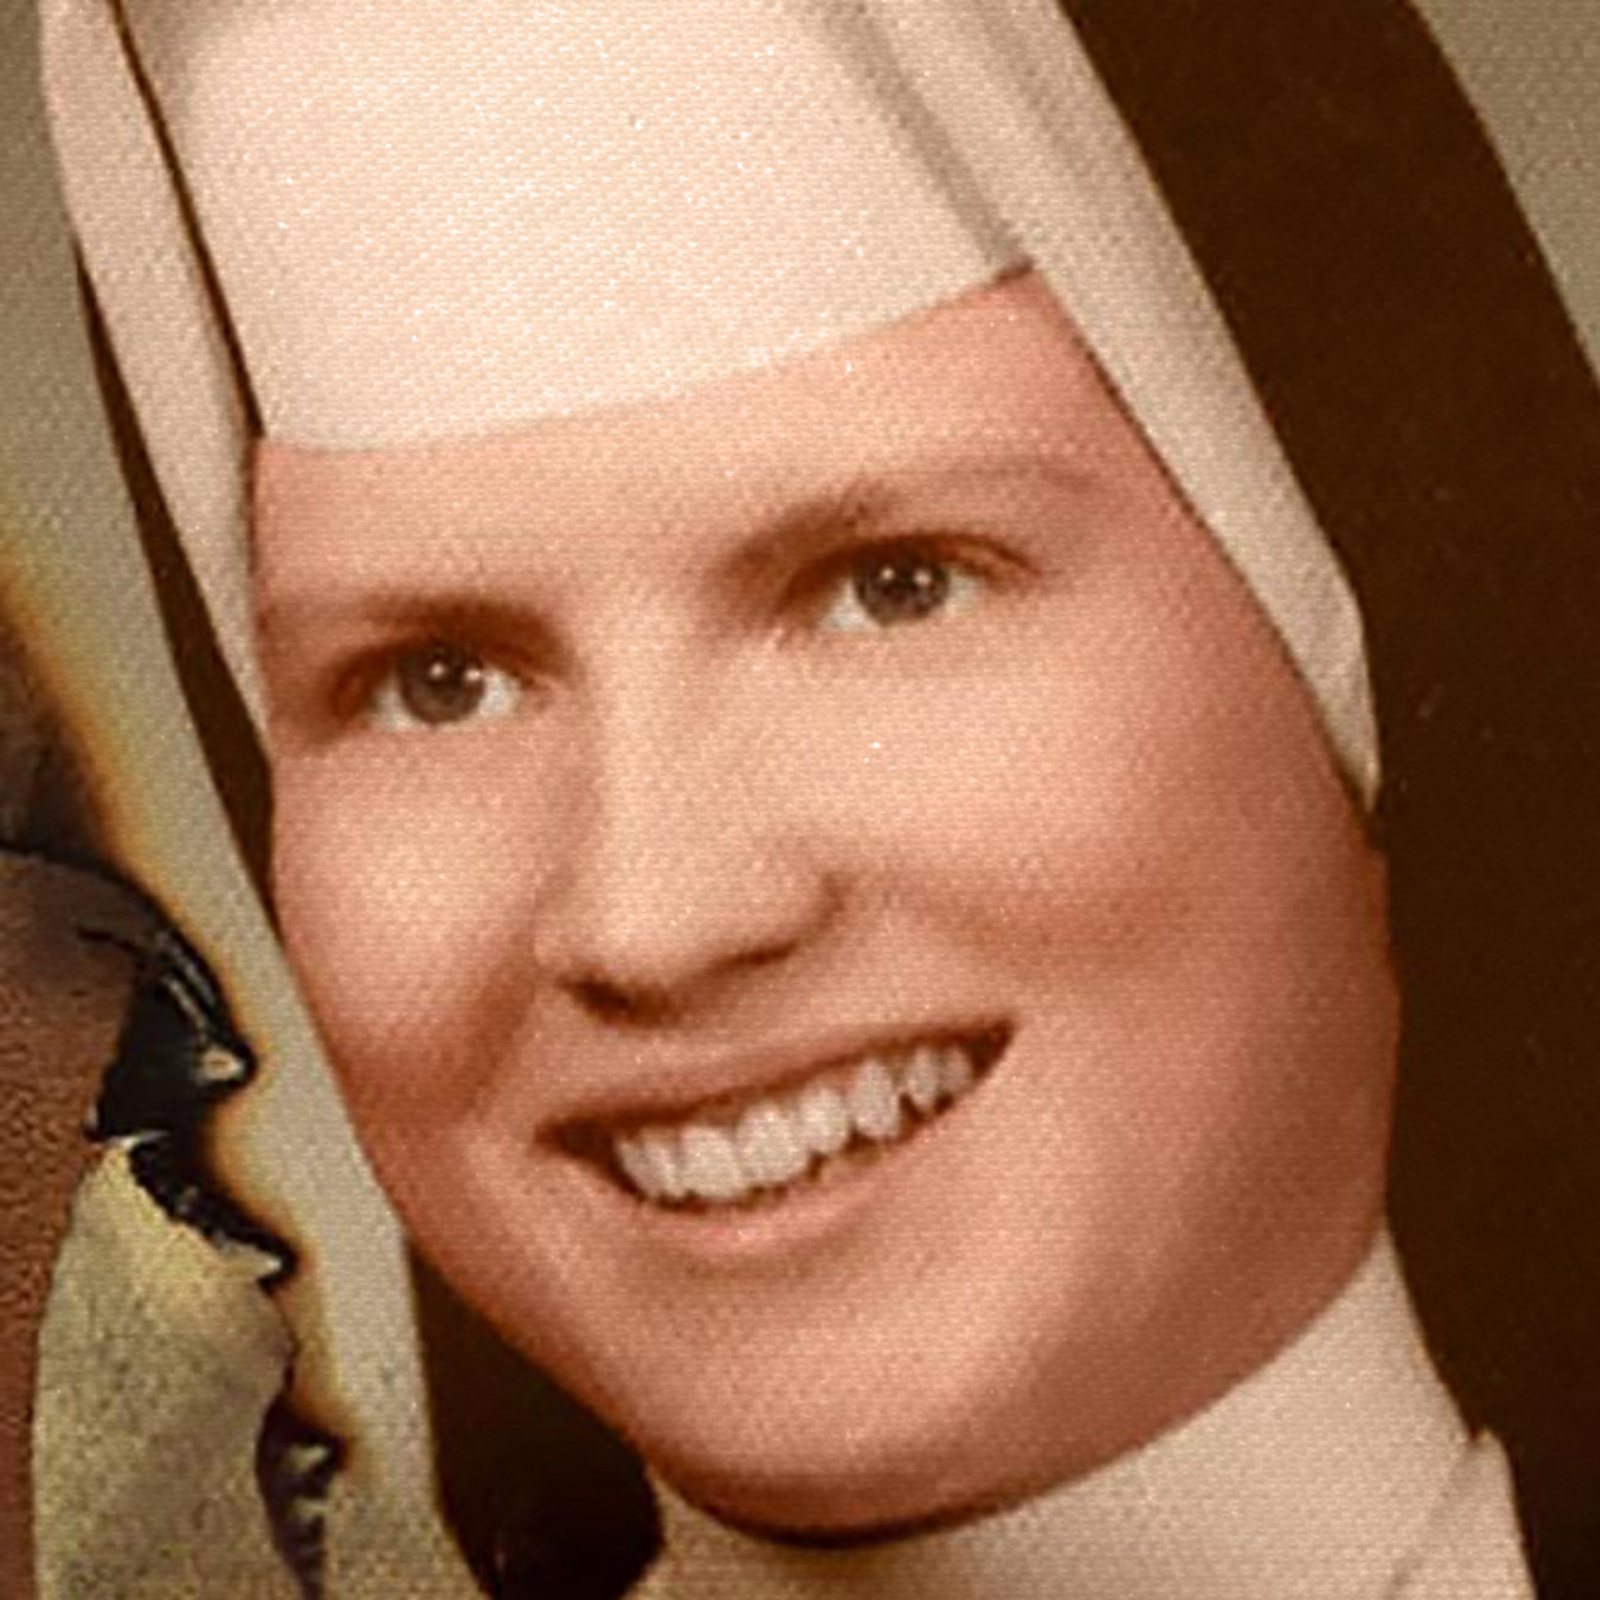 S2 Ep85: Unsolved Murder of Sister Cathy [Transparency and Accountability at the Archdiocese of Baltimore]